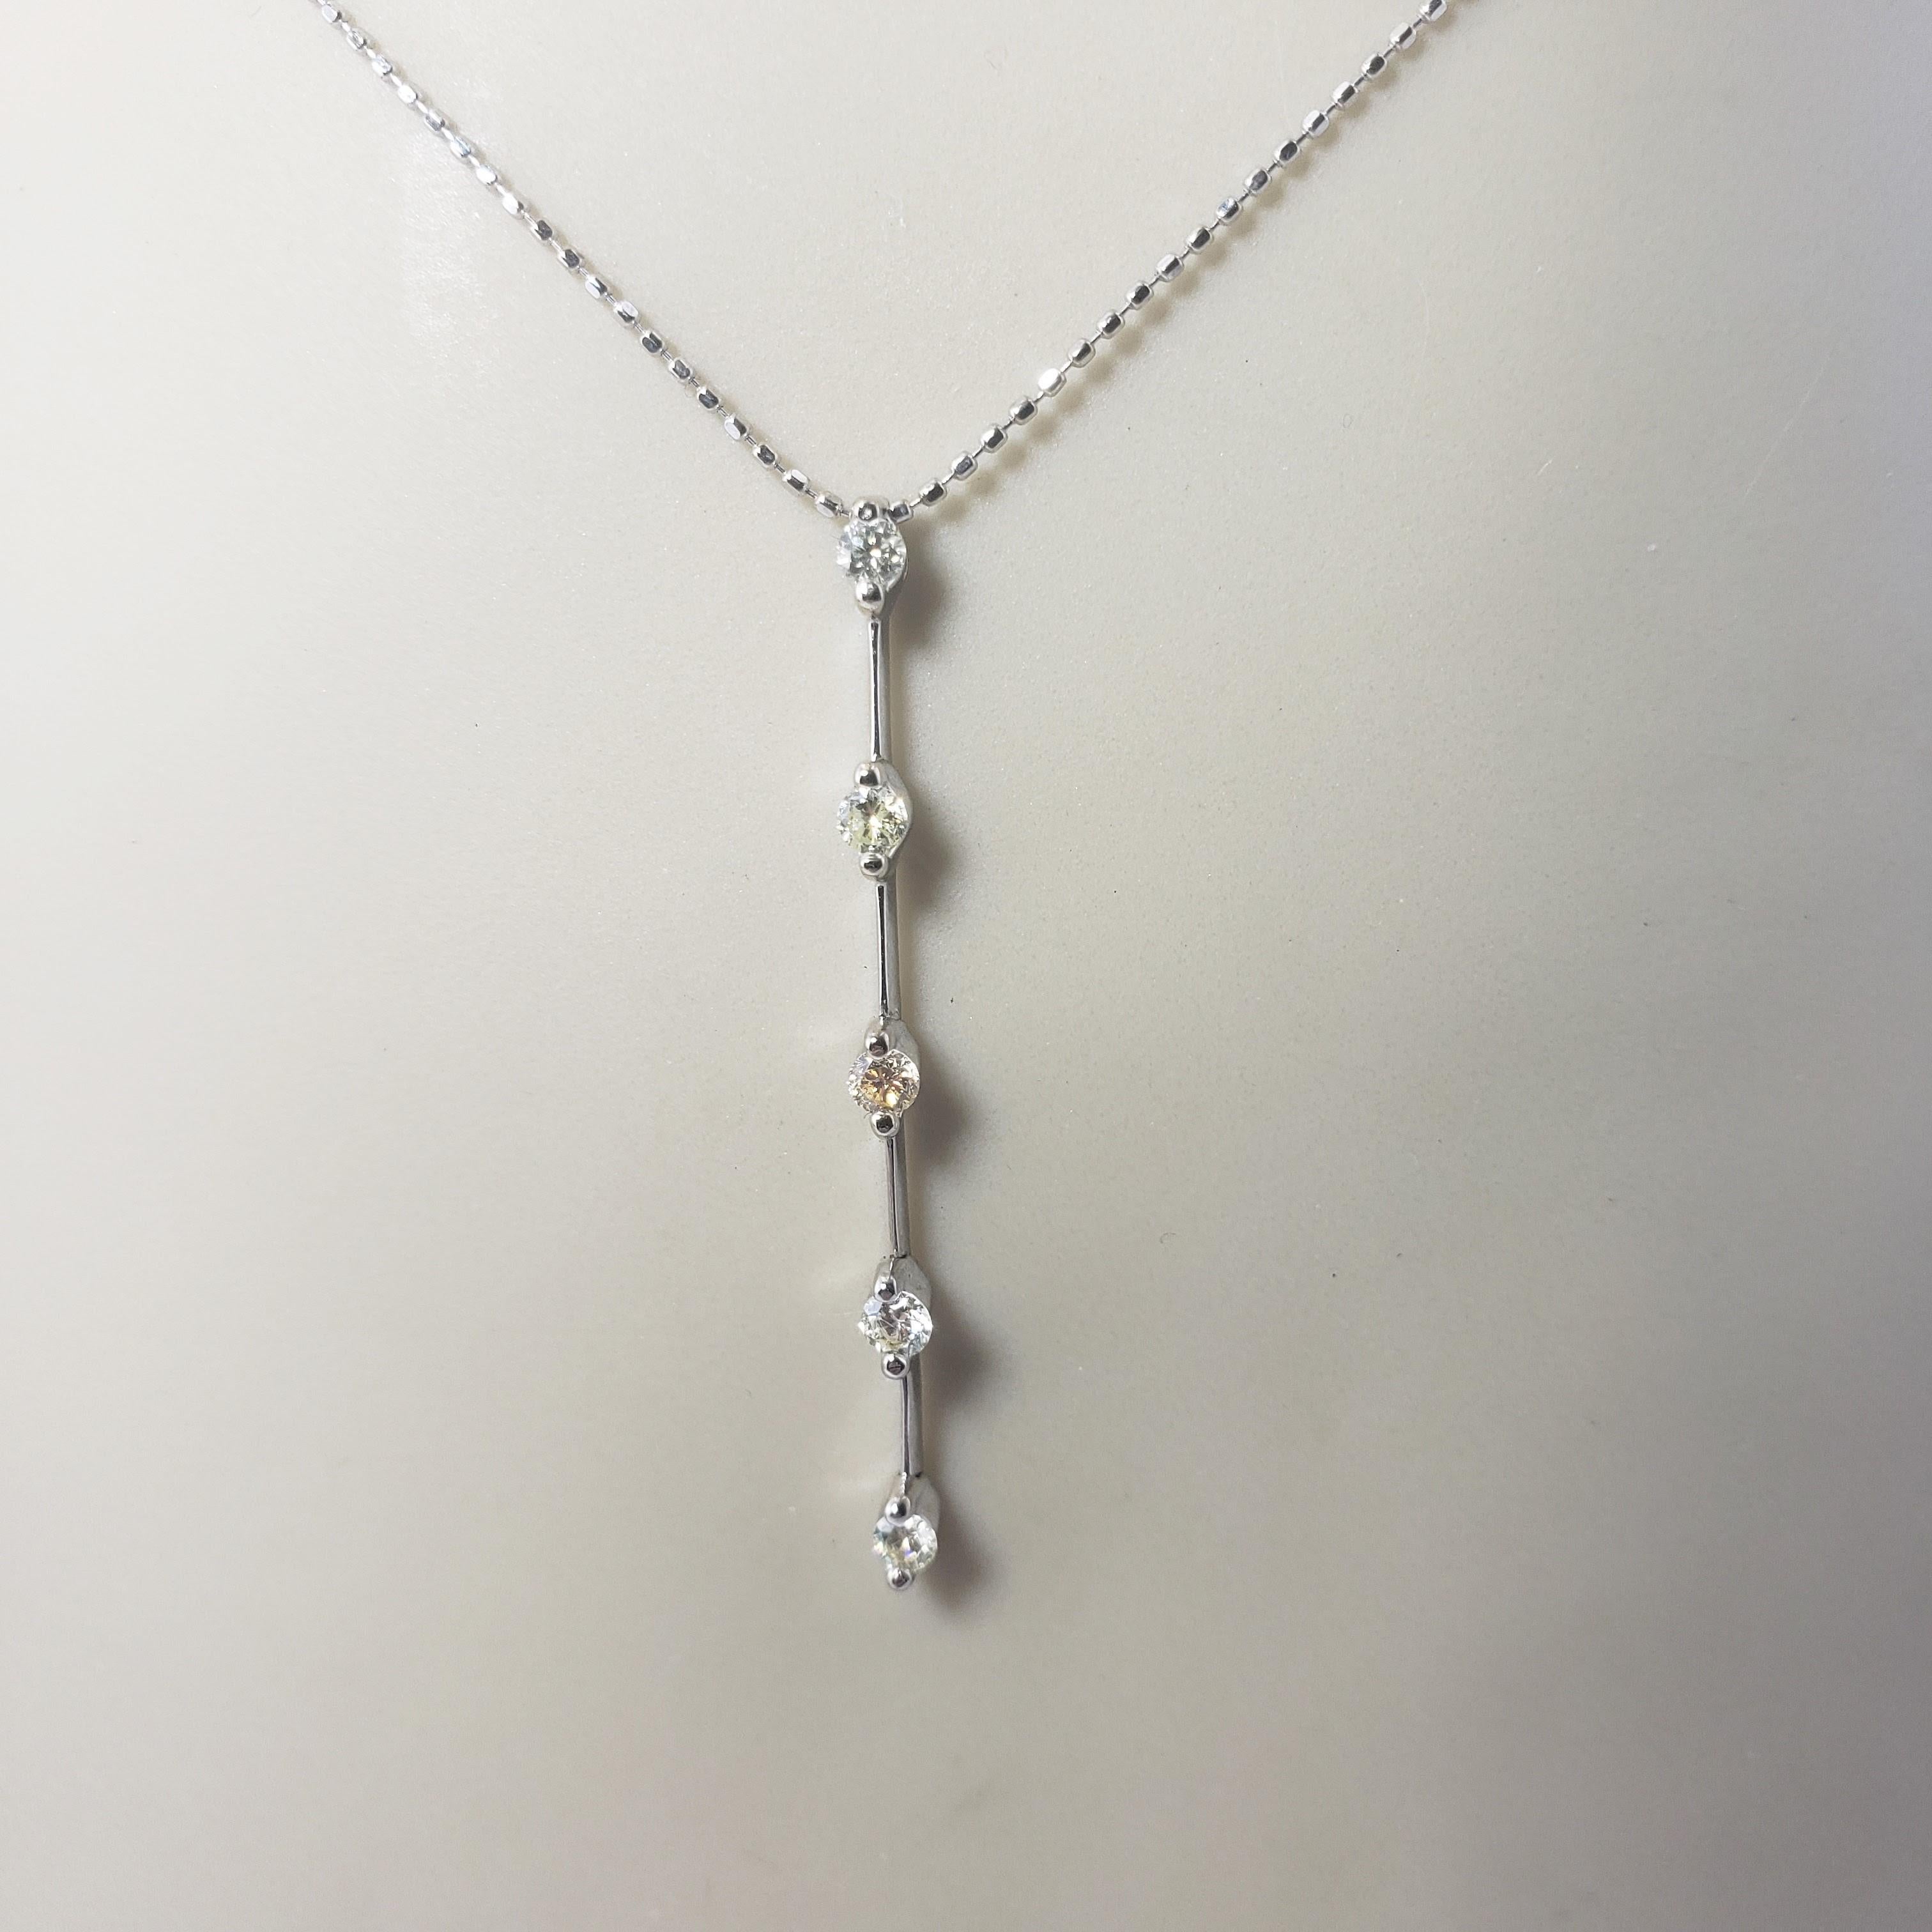 18 Karat White Gold and Diamond Pendant Necklace For Sale 2